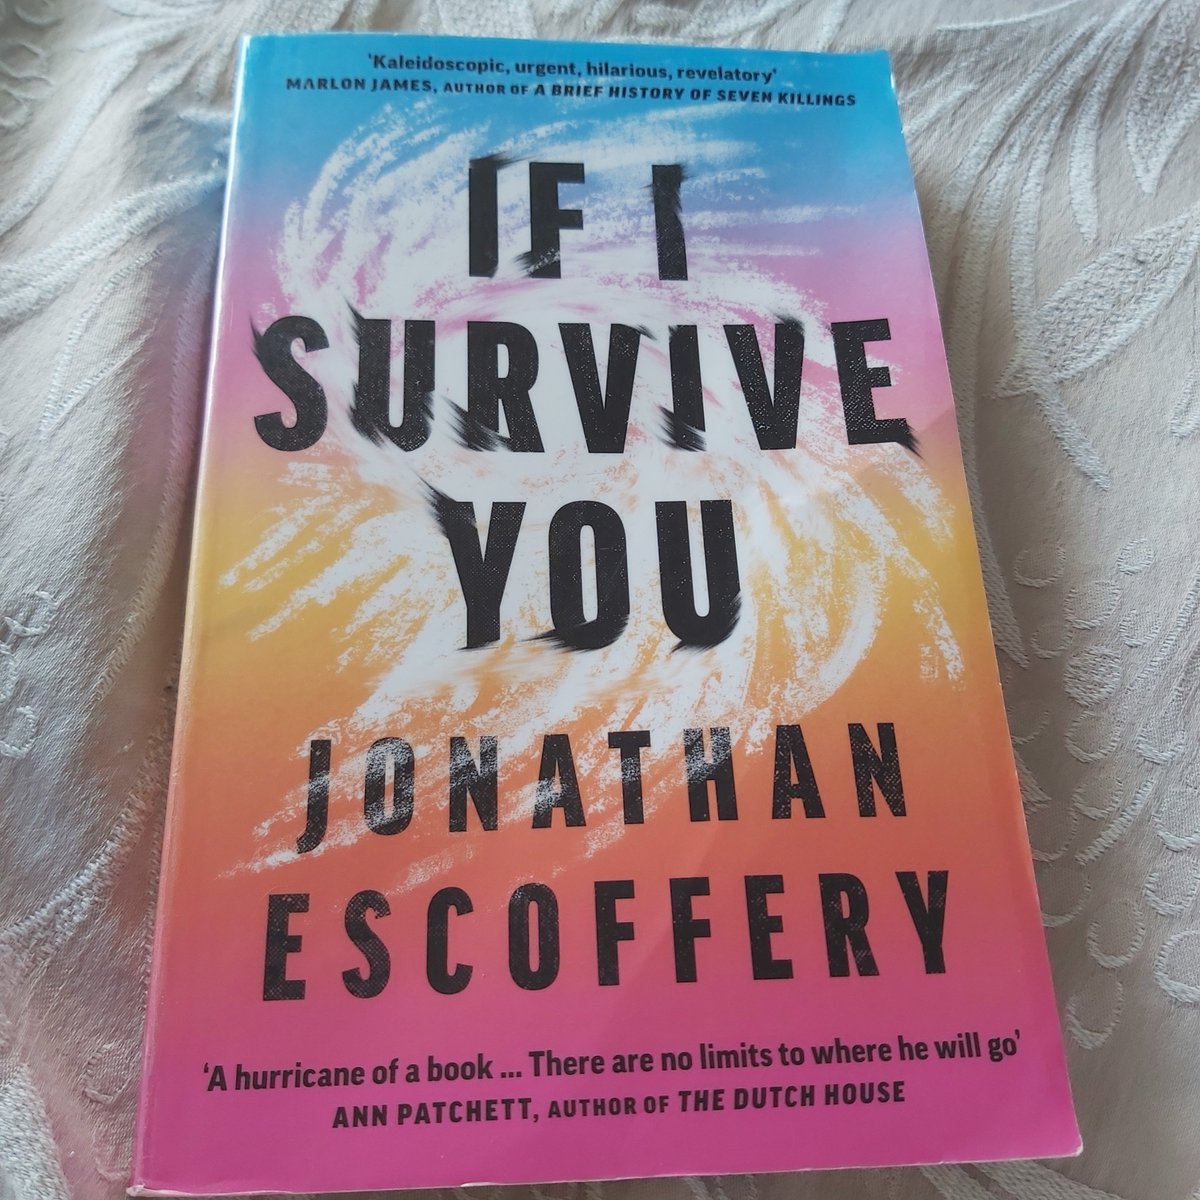 Picked up If I Survive You by Jonathan Escoffery last night in Blanchardstown Library @fingallibraries Hooked from page one! My 2nd read from @DublinLitAward Shortlist. Winner will be announced next Thurs @ILFDublin